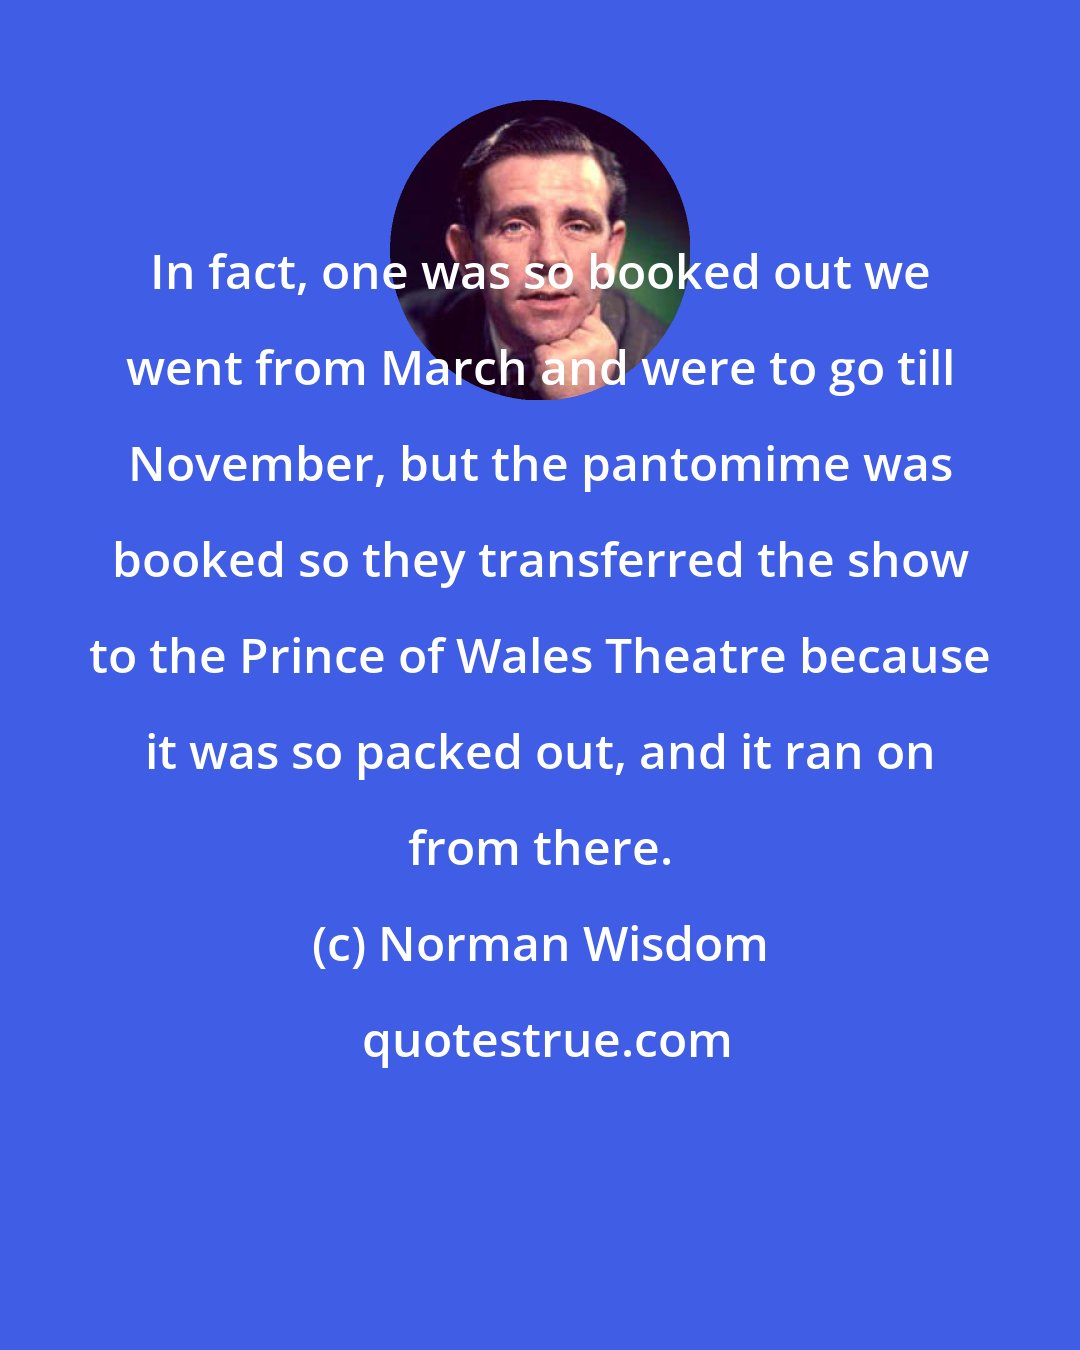 Norman Wisdom: In fact, one was so booked out we went from March and were to go till November, but the pantomime was booked so they transferred the show to the Prince of Wales Theatre because it was so packed out, and it ran on from there.